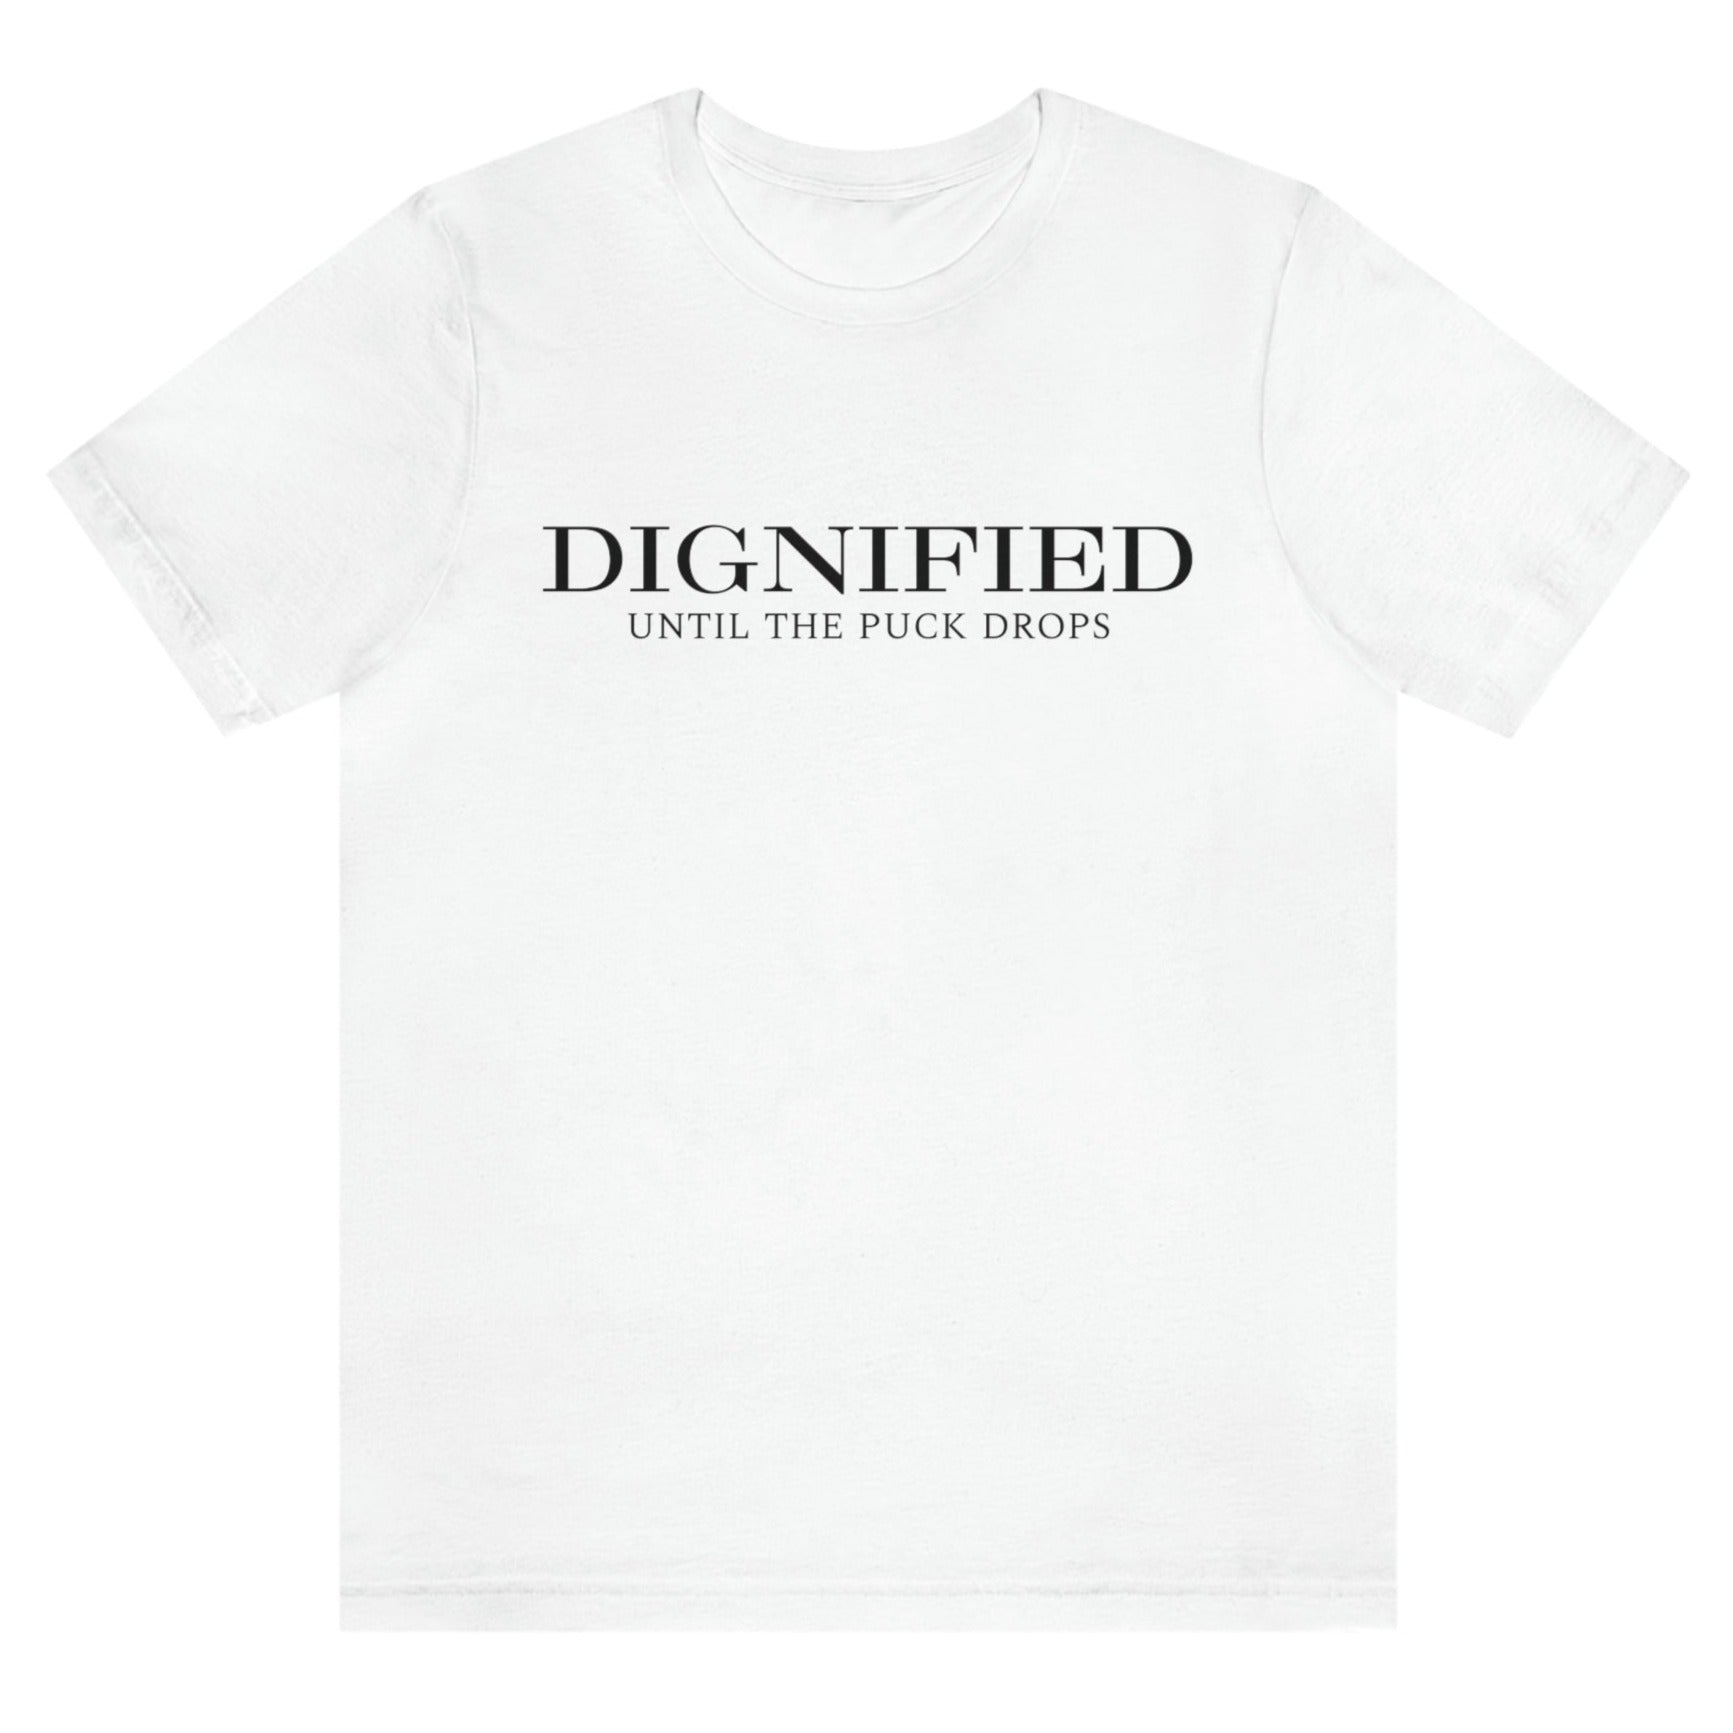 dignified-until-the-puck-drops-white-t-shirt-mens-sports-hockey